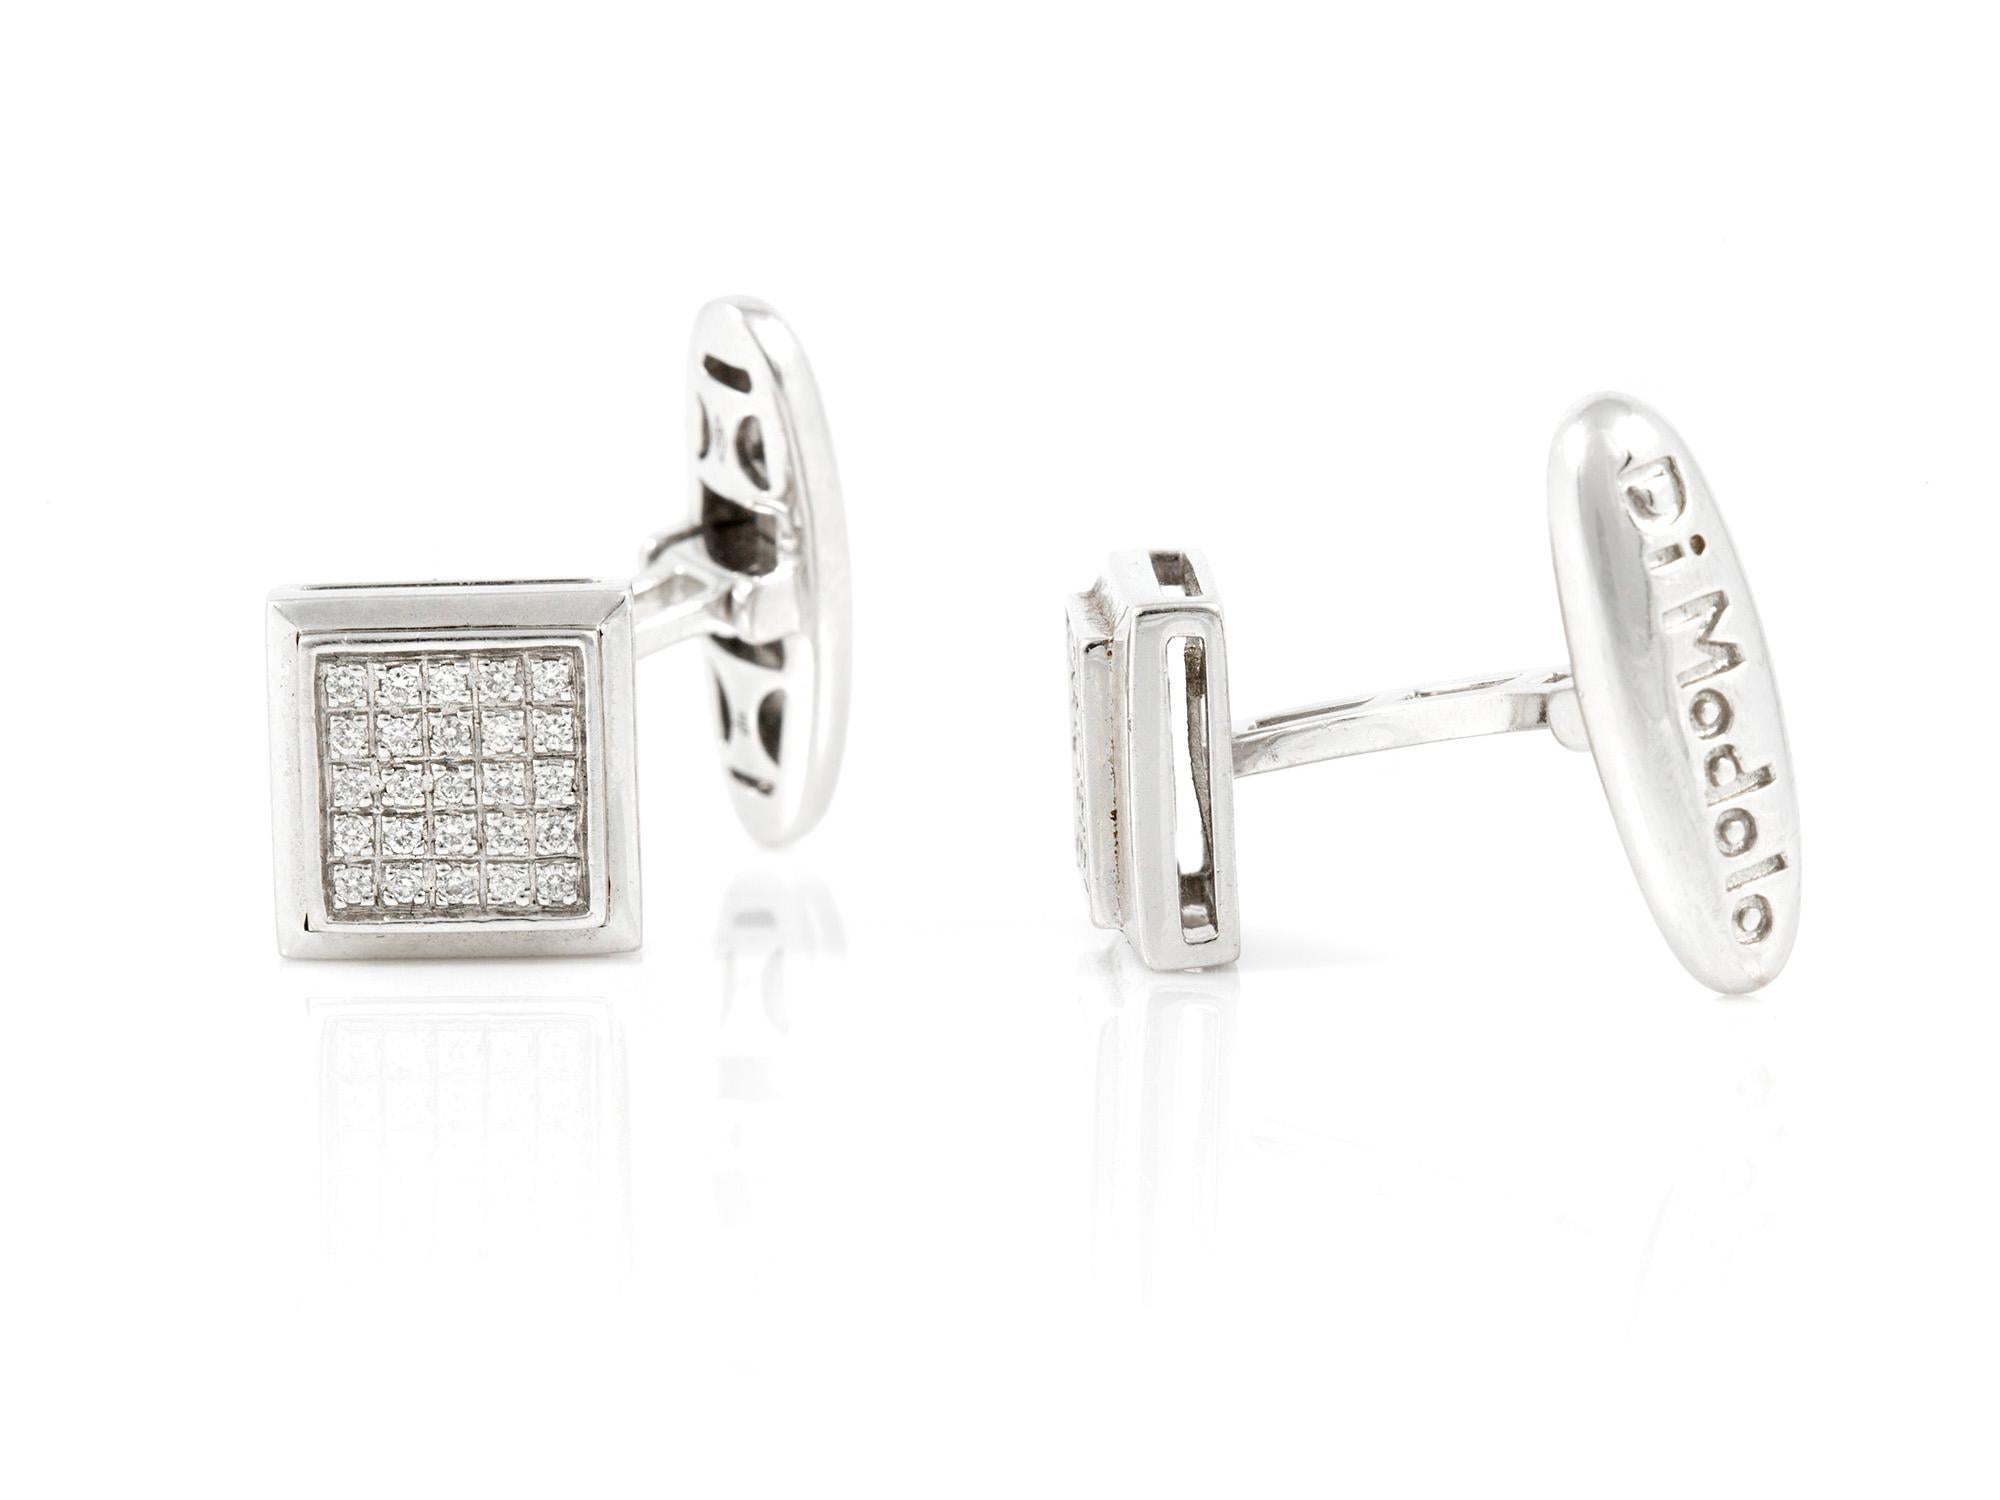 Cufflinks finely crafted in 18k white gold with diamonds weighing a total of 0.80 carat.